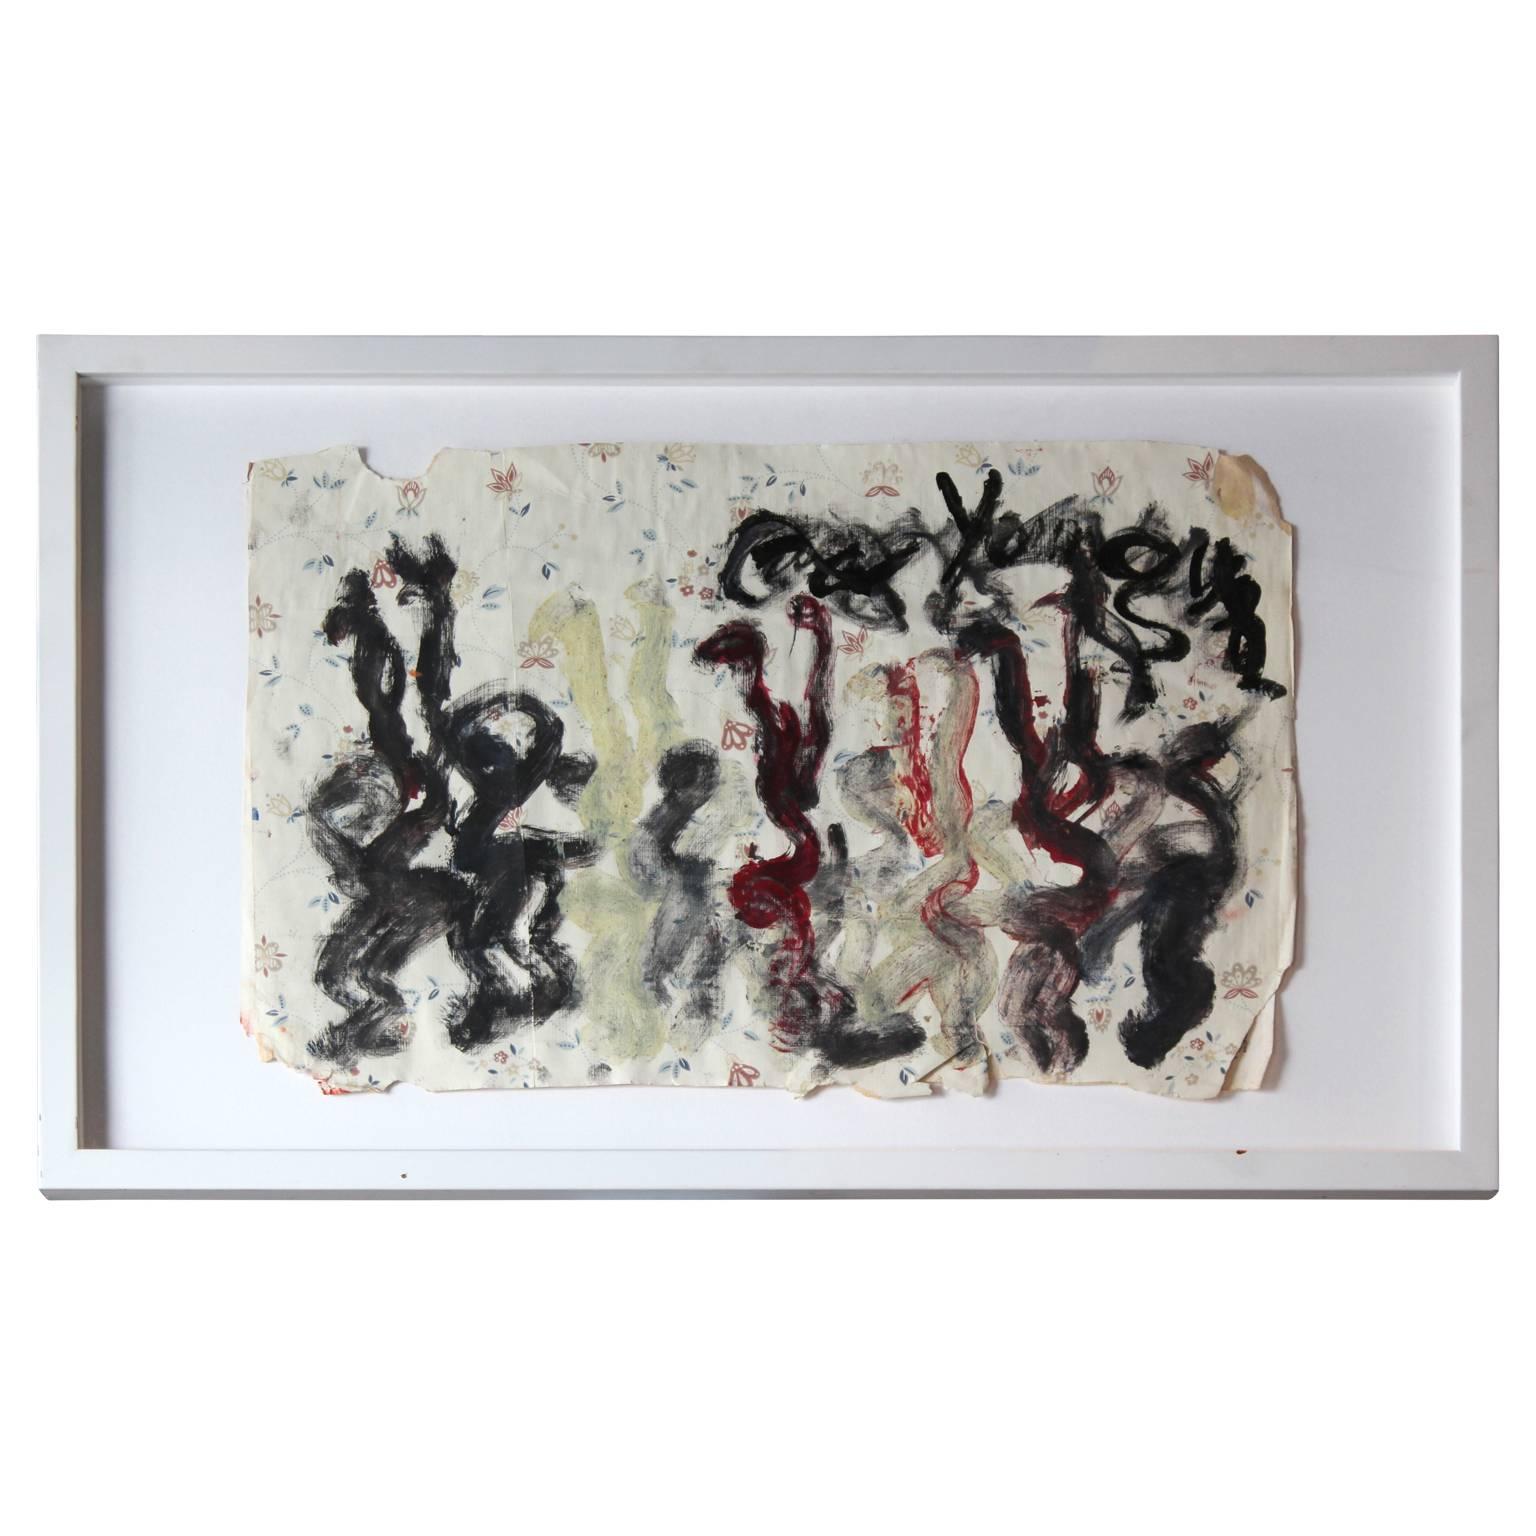 Purvis Young Figurative Painting - Expressionist Dancers Painted on Wallpaper